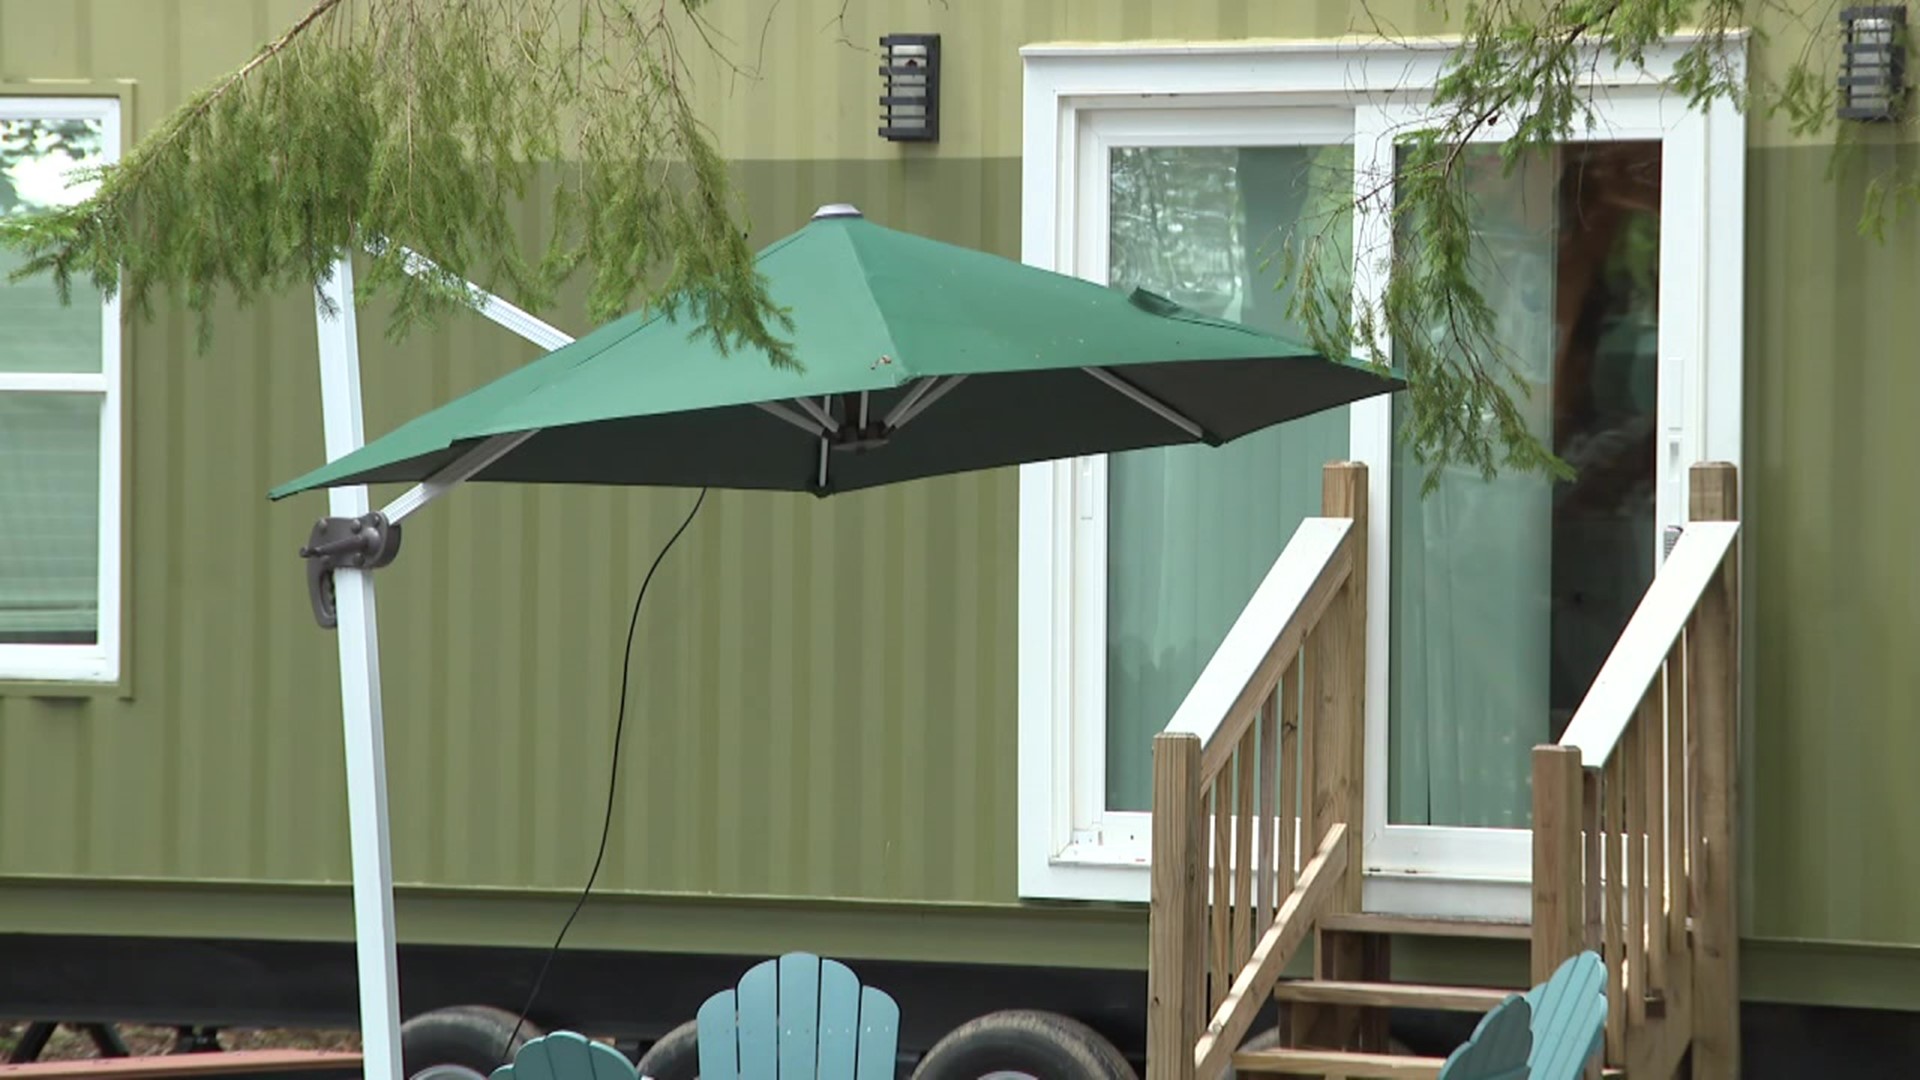 A new resort in Carbon County promises to combine nature and luxury and offers a new glamping experience. Newswatch 16's Amanda Eustice shows us to Camptel Poconos.